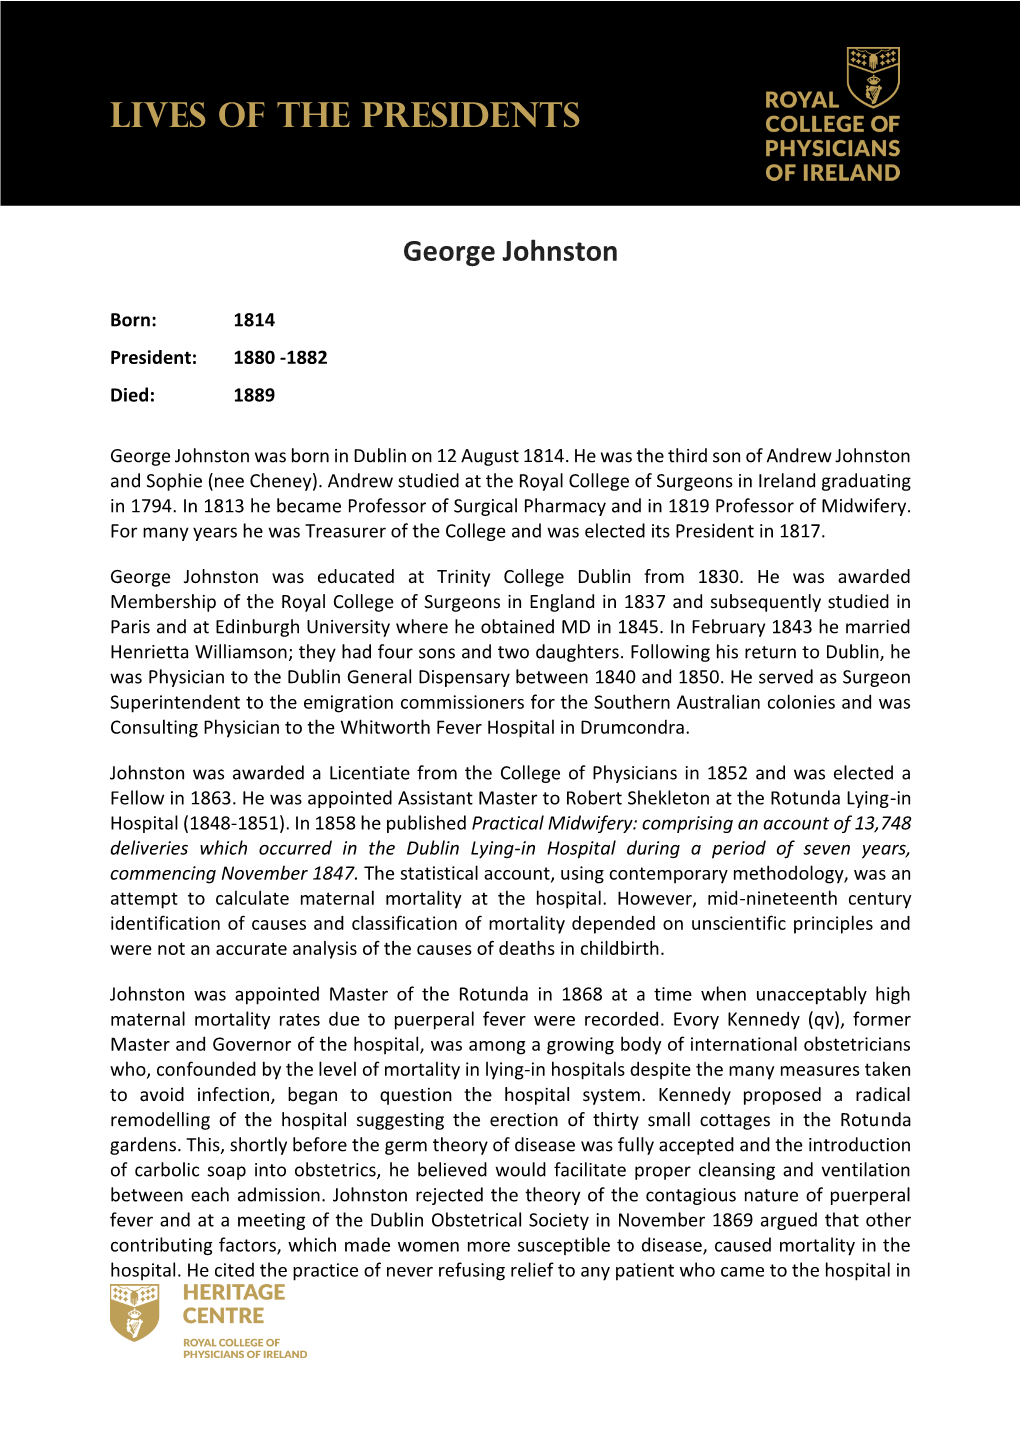 LIVES of the PRESIDENTS George Johnston